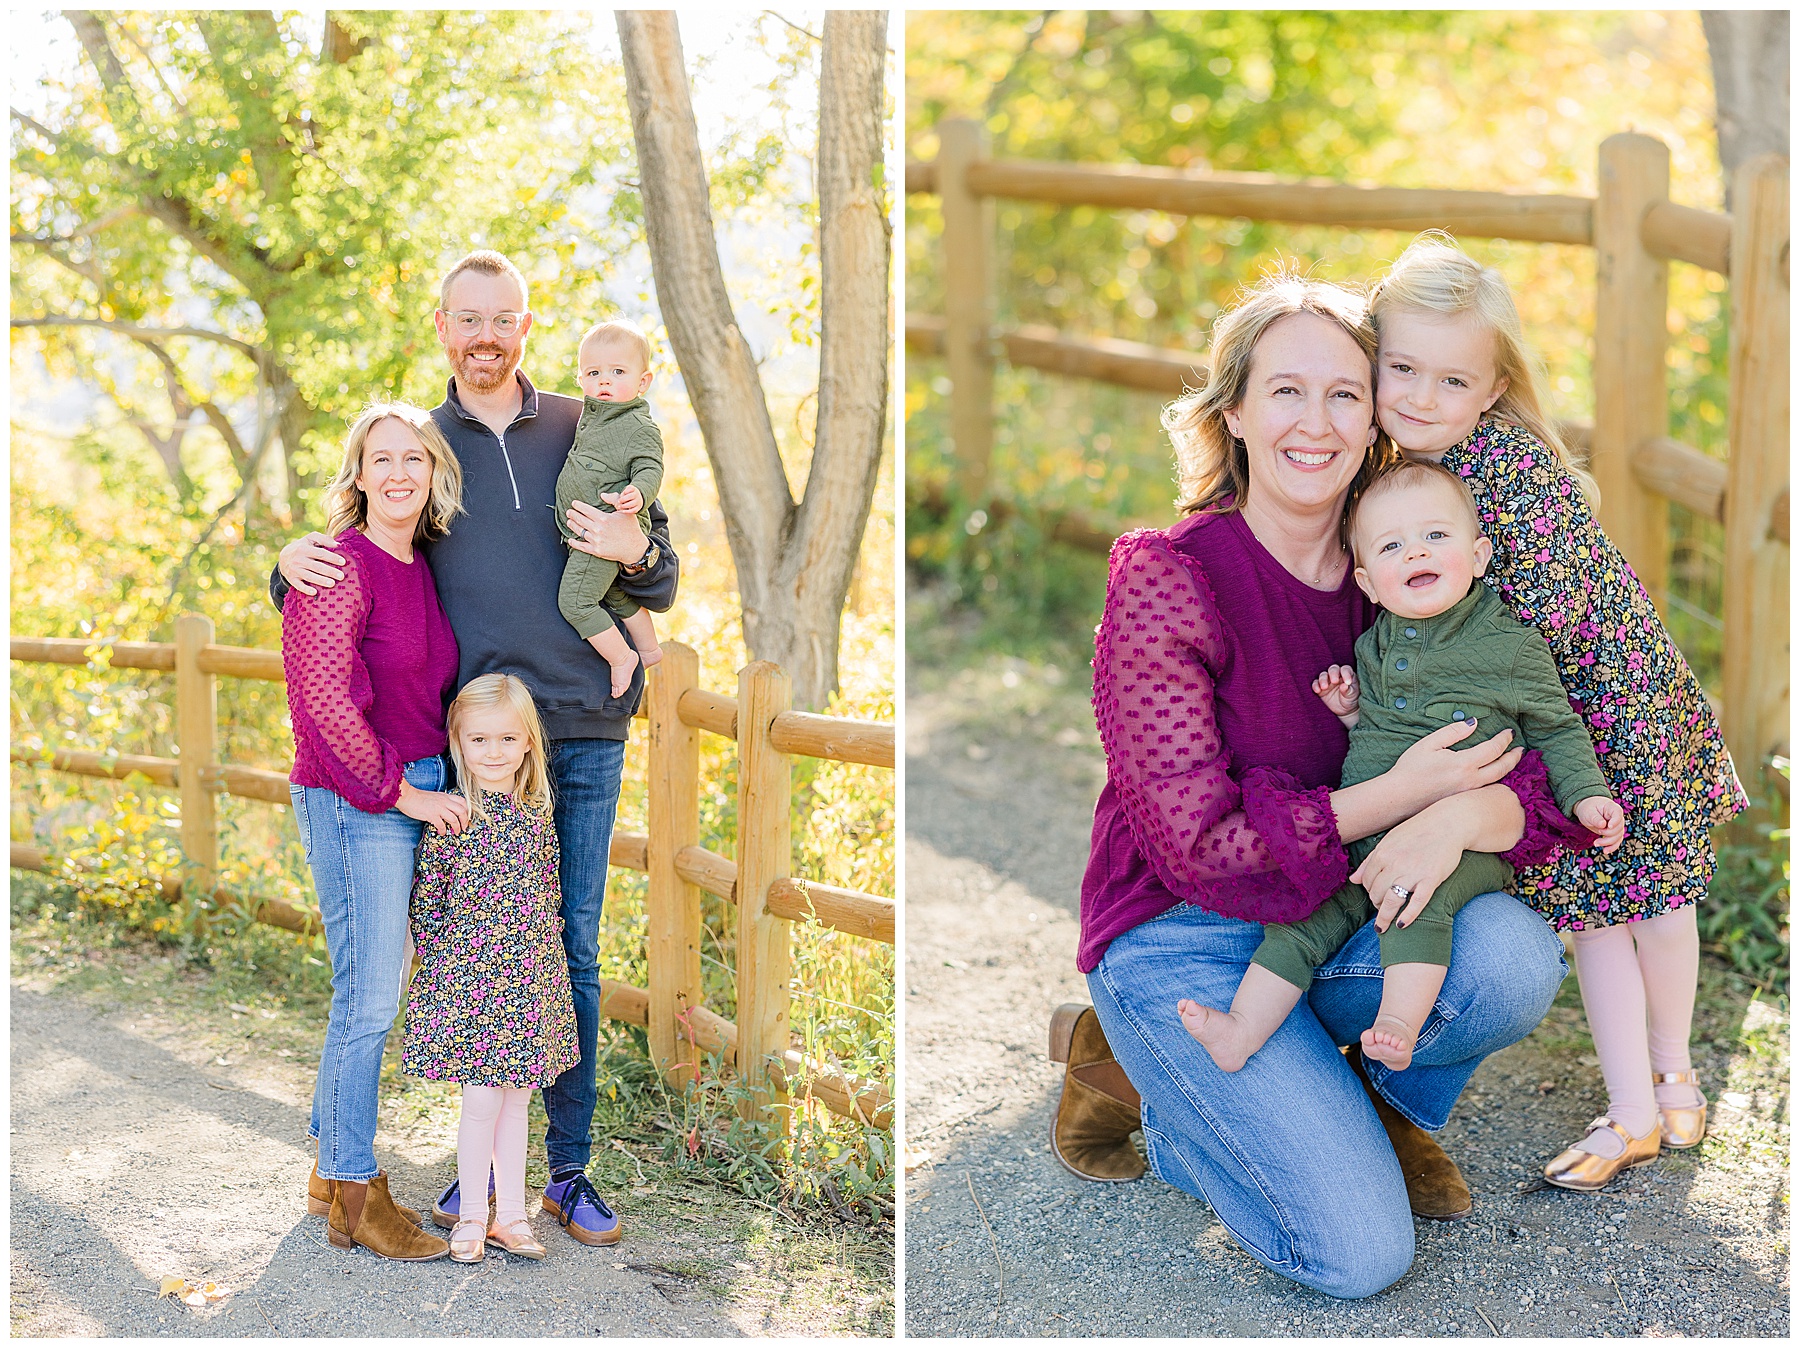 Catherine Chamberlain Photography captures family at South Mesa Trailhead